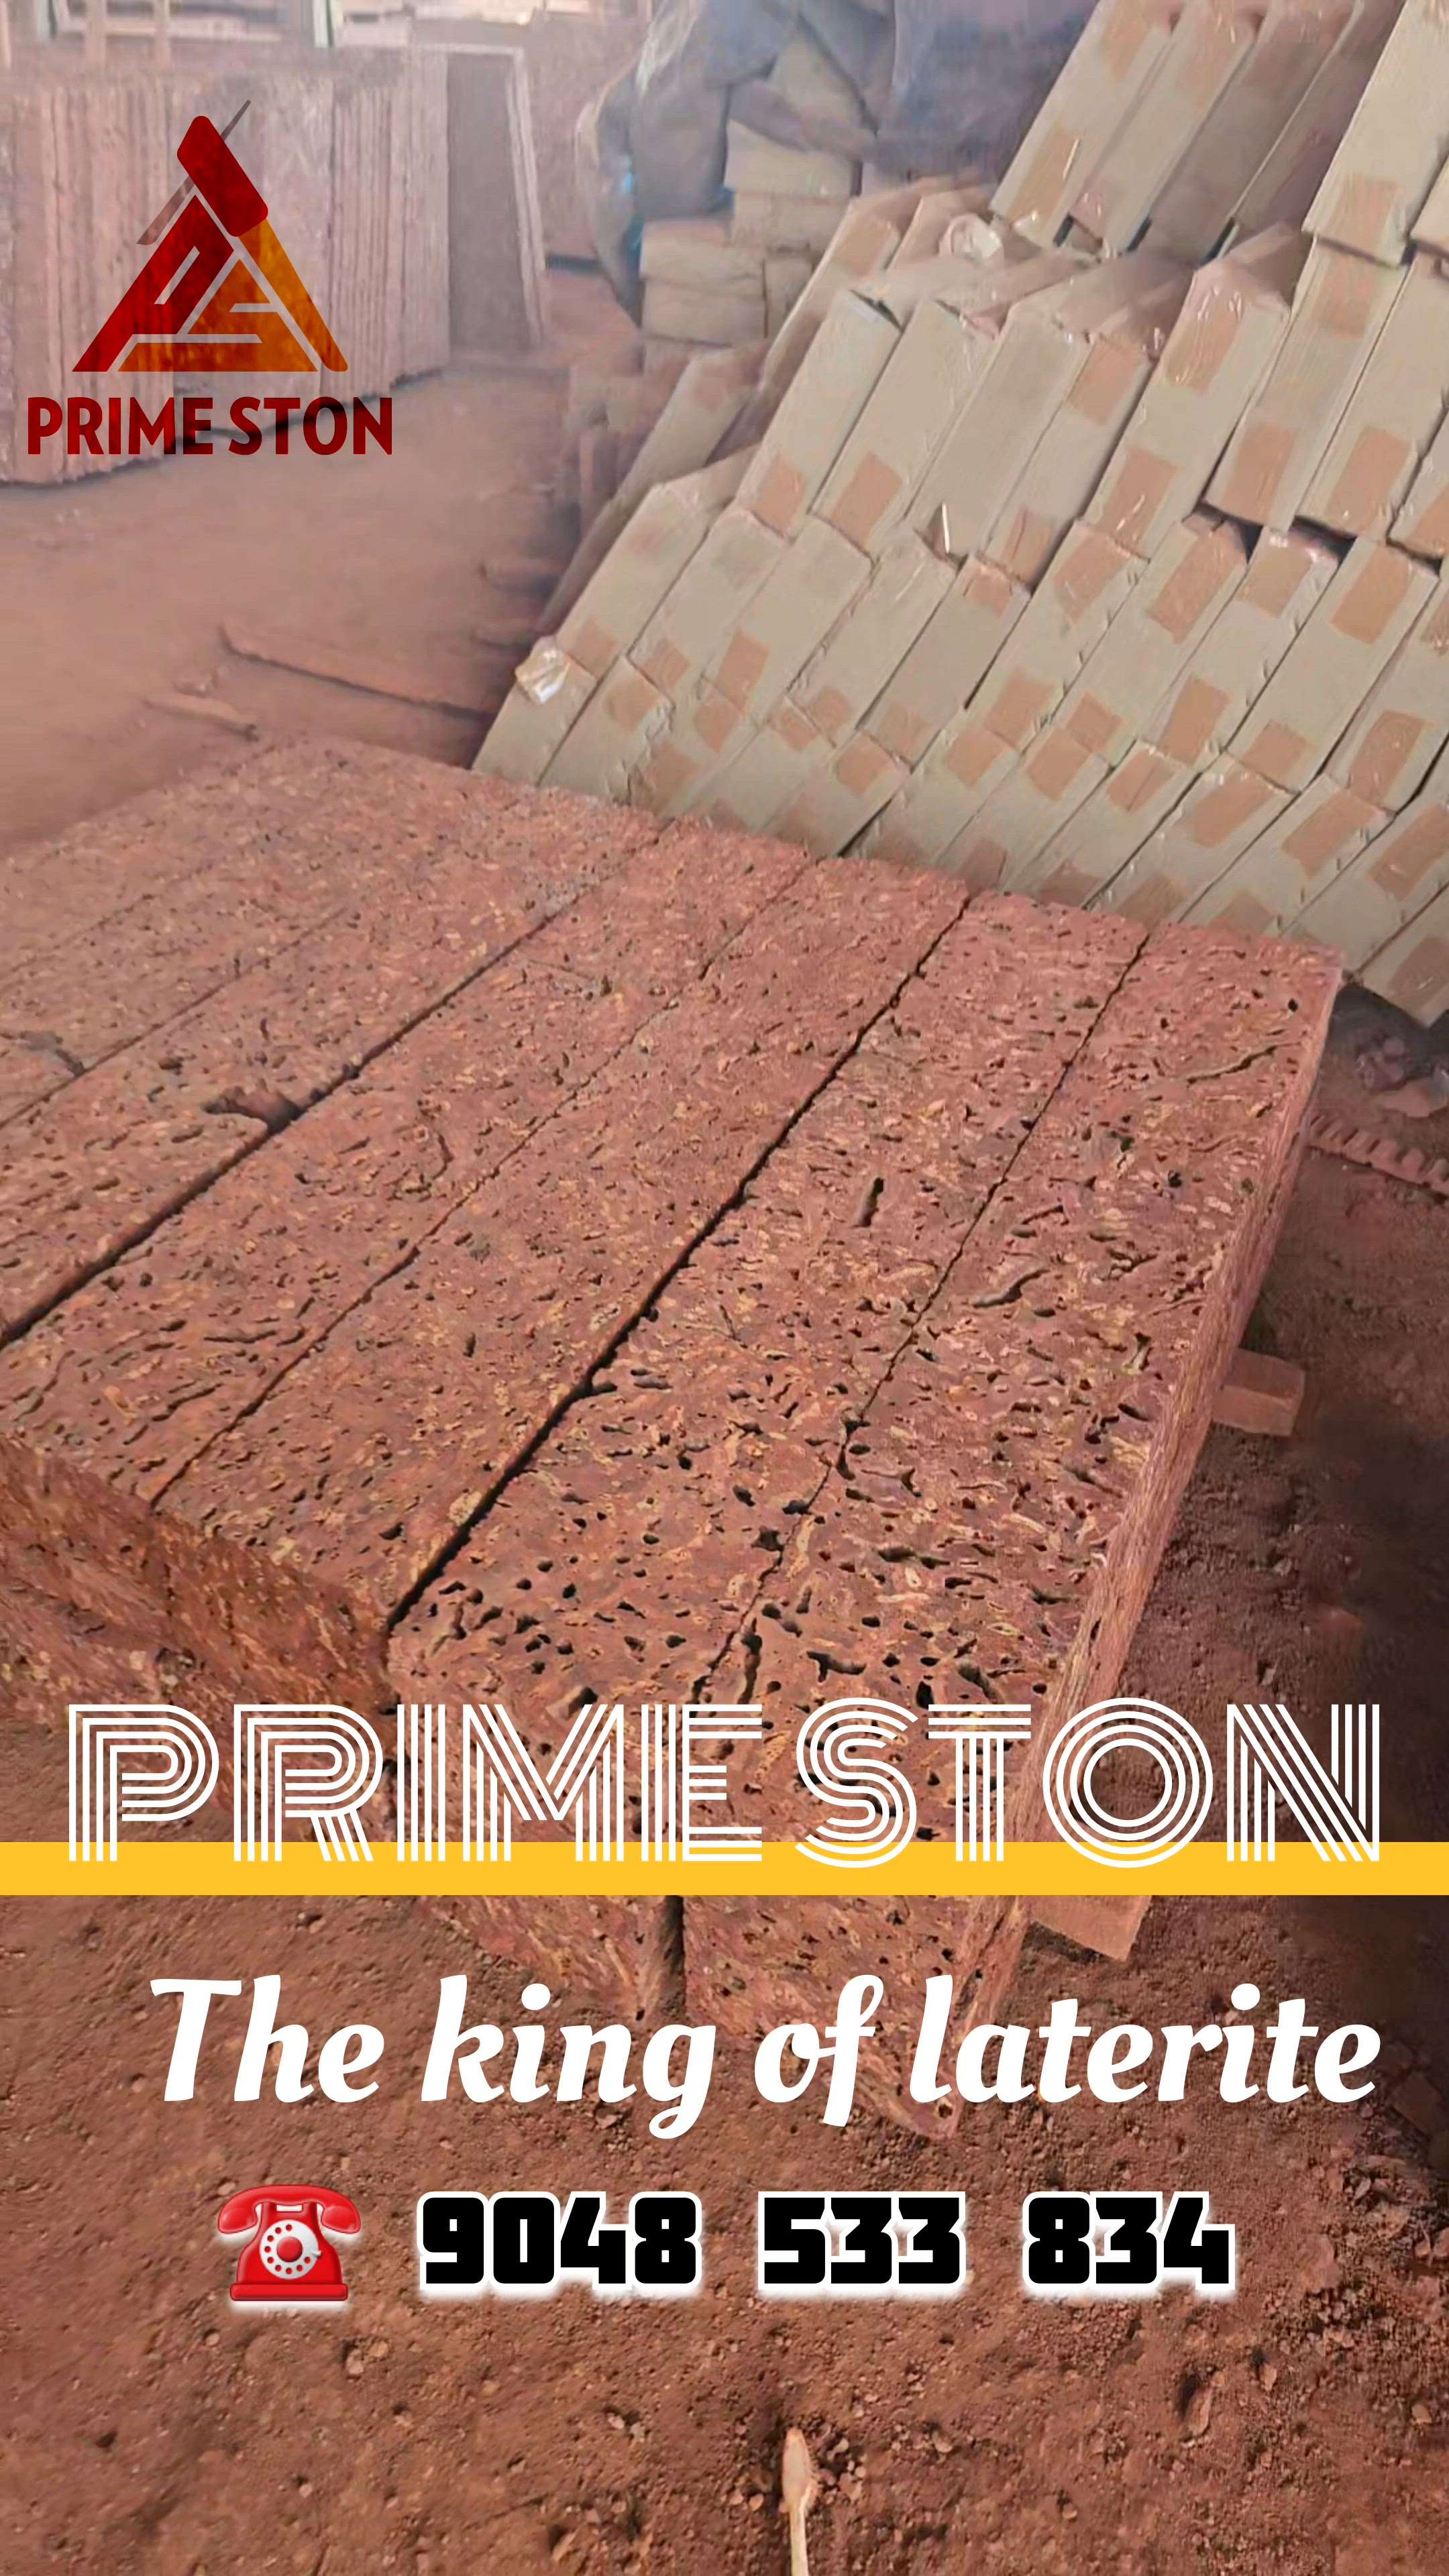 PRIME STON❤️
The king of laterite
Laterite Cladding Tiles# Laterite Flooring Slabs# Laterite Paving Stones, Laterite Furniture's, Laterite Monuments, Laterite Single Pillars ...
💚100% Natural Laterite Stone Products Manufacturer and laying contractor 💚
Our Service Available Allover India

Pillars available sizes..
From 24×6×6 to 7×12×12

Cladding available Sizes....
12/6,12/7,15/9,18/9,21/9,24/9 inches 20 mm thickness...

Paving available sizes....
12×12, 18×18, 24×24 inches 50 mm thickness

Slabs available sizes....
6/2 feet 25mm, 40 mm, 50 mm, 100 mm

Laterite furnitures and customized sizes also available...

Contact - 7306 706 542, 9188 007 961
 

primelaterite@gmail.com 
www.primestone.co. in
https://youtu.be/CtoUAPbgX08
 #Architect  #newmodal  #pillars  #TraditionalHouse